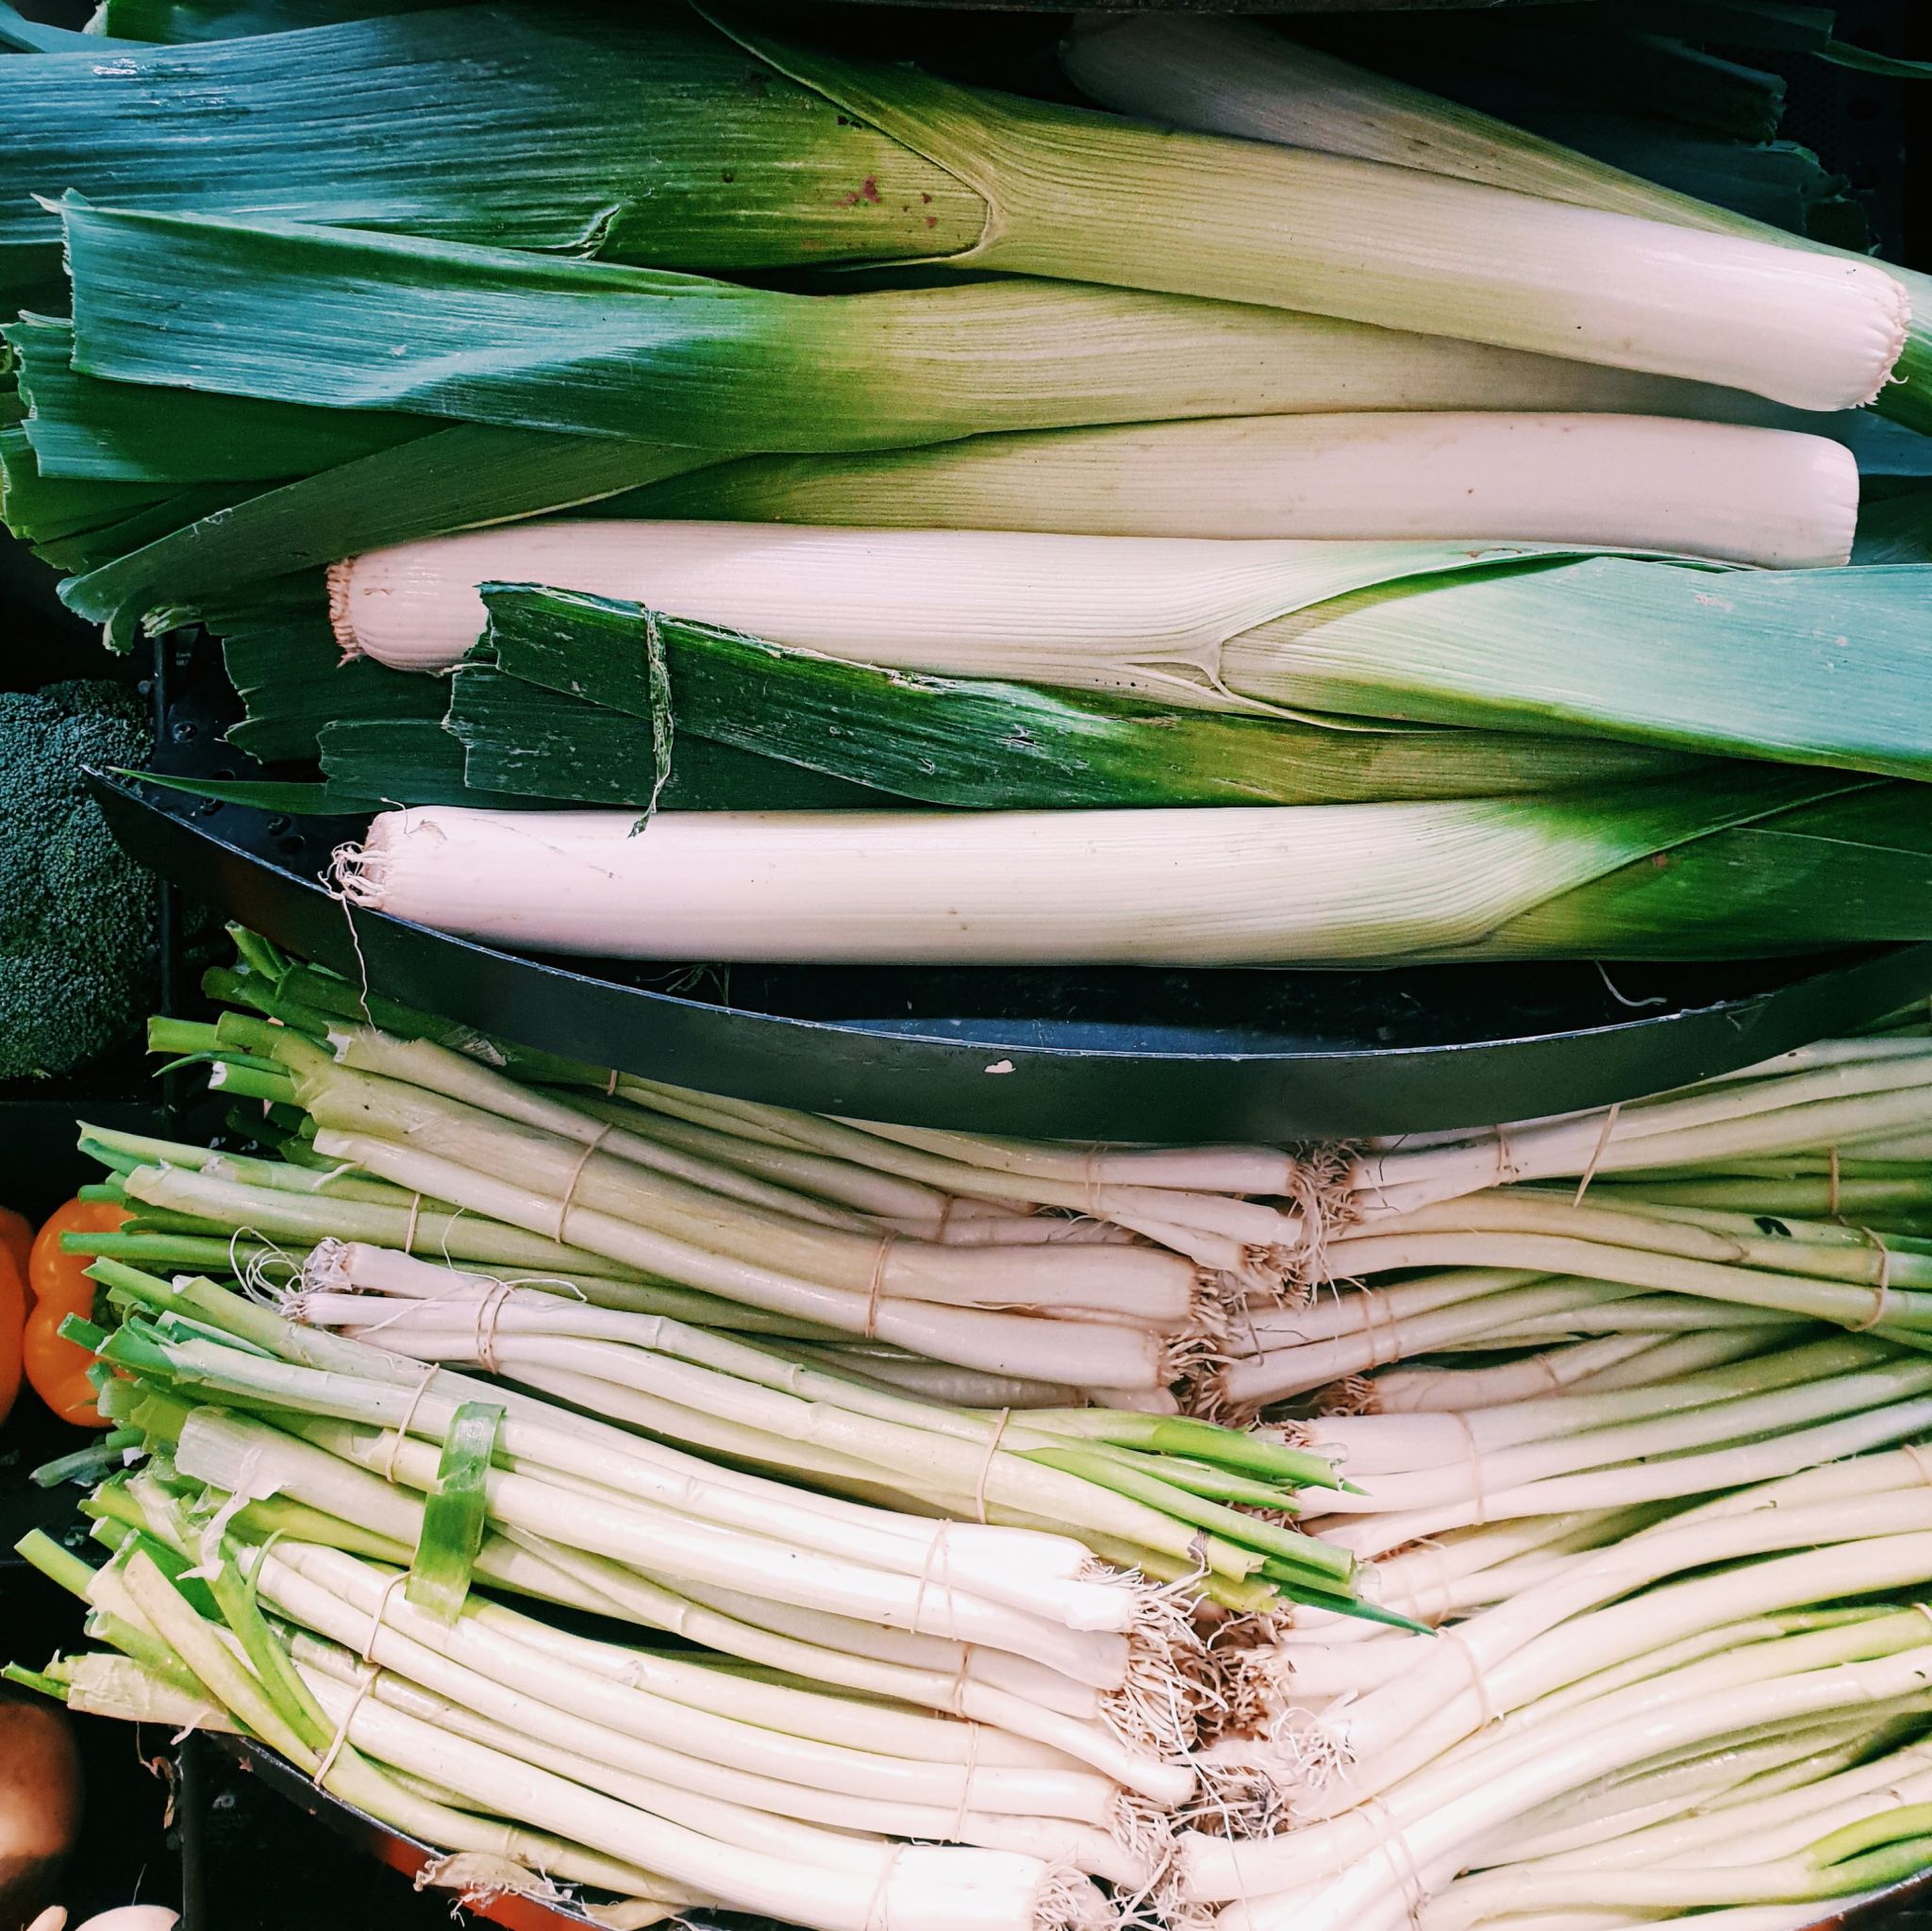 Spring onions and leeks in the vegetable section